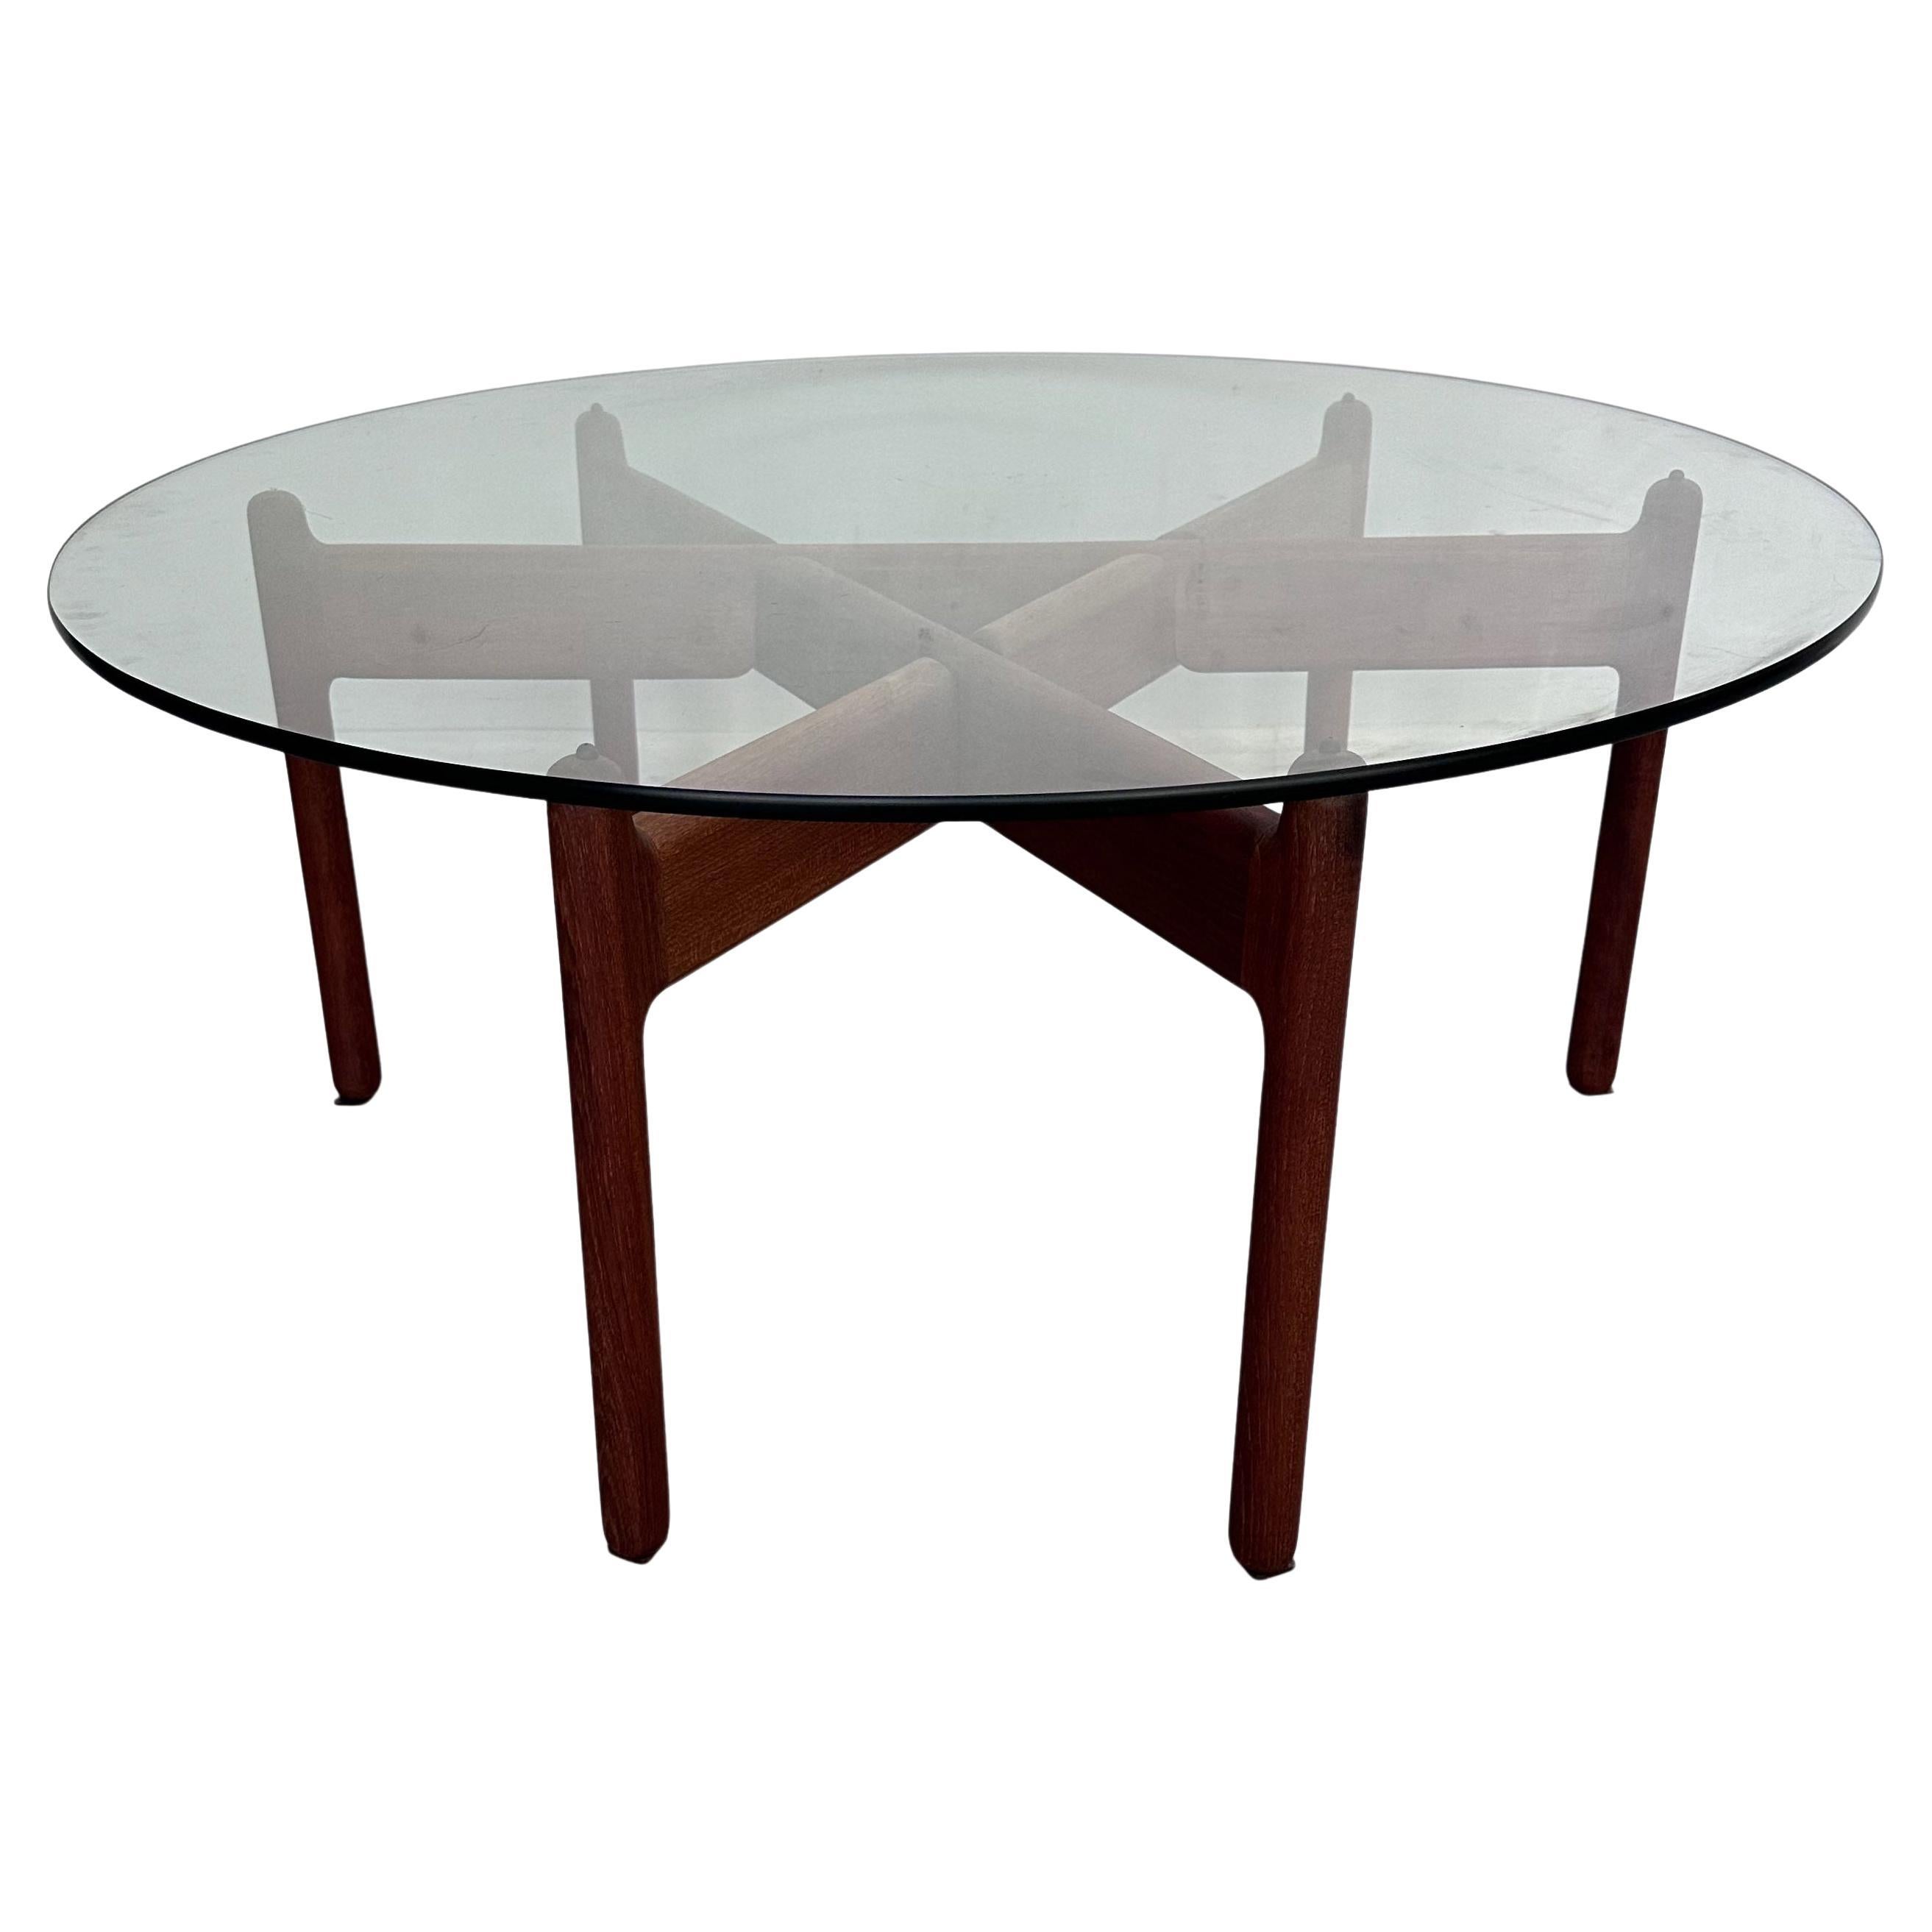 Niels Bach Coffee/Cocktail Table in Teak Denmark 1960 Midcentury For Sale